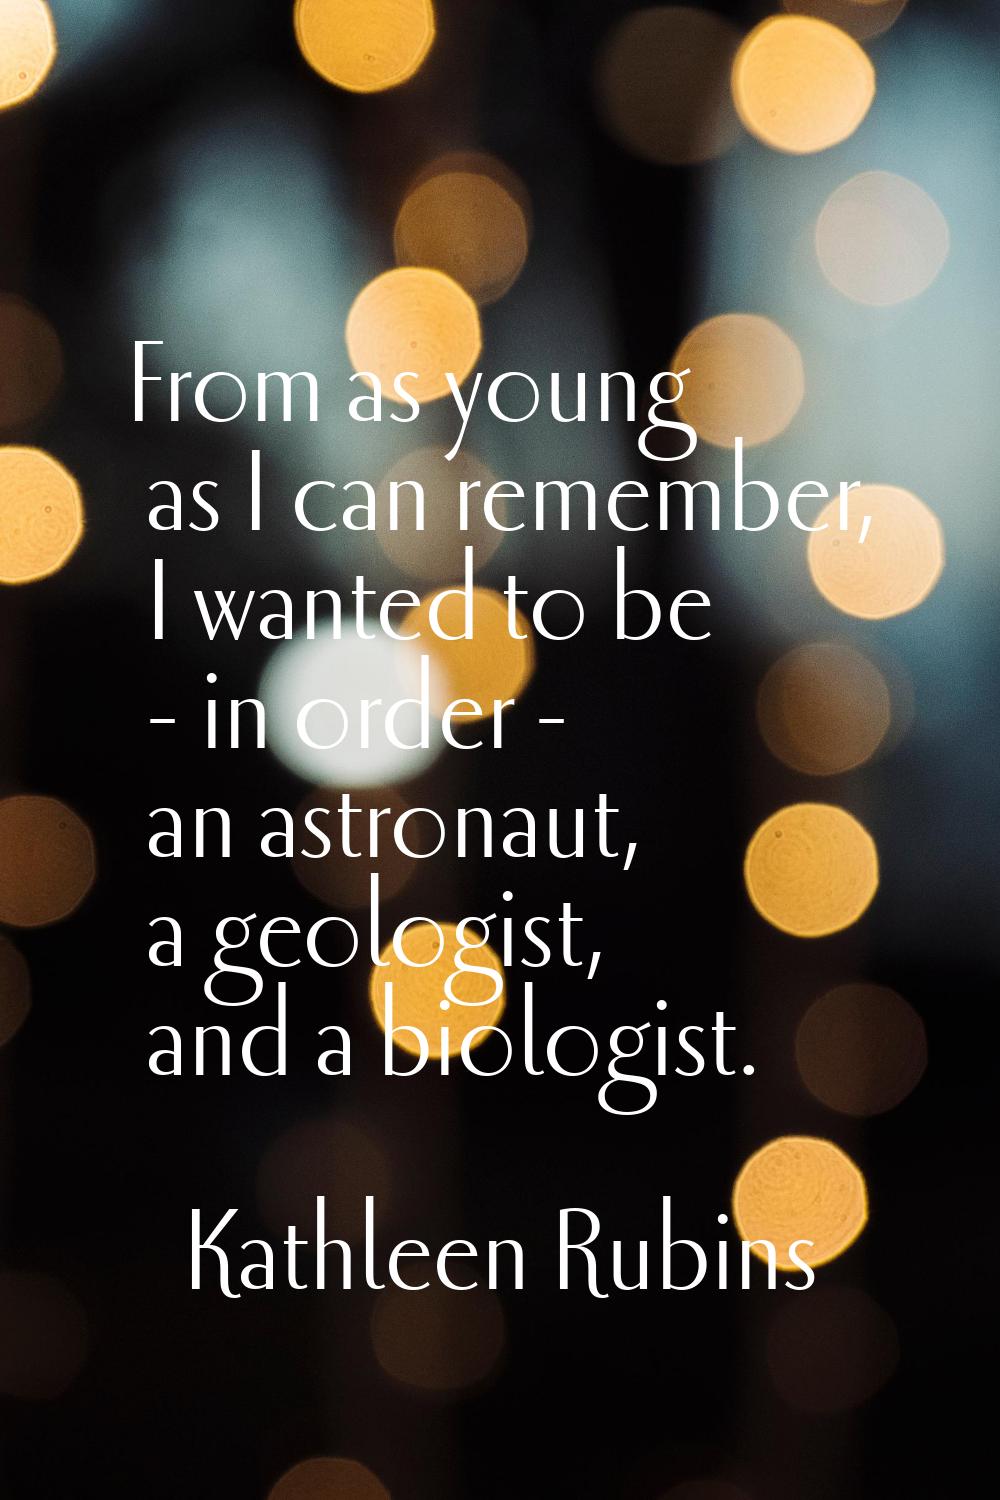 From as young as I can remember, I wanted to be - in order - an astronaut, a geologist, and a biolo